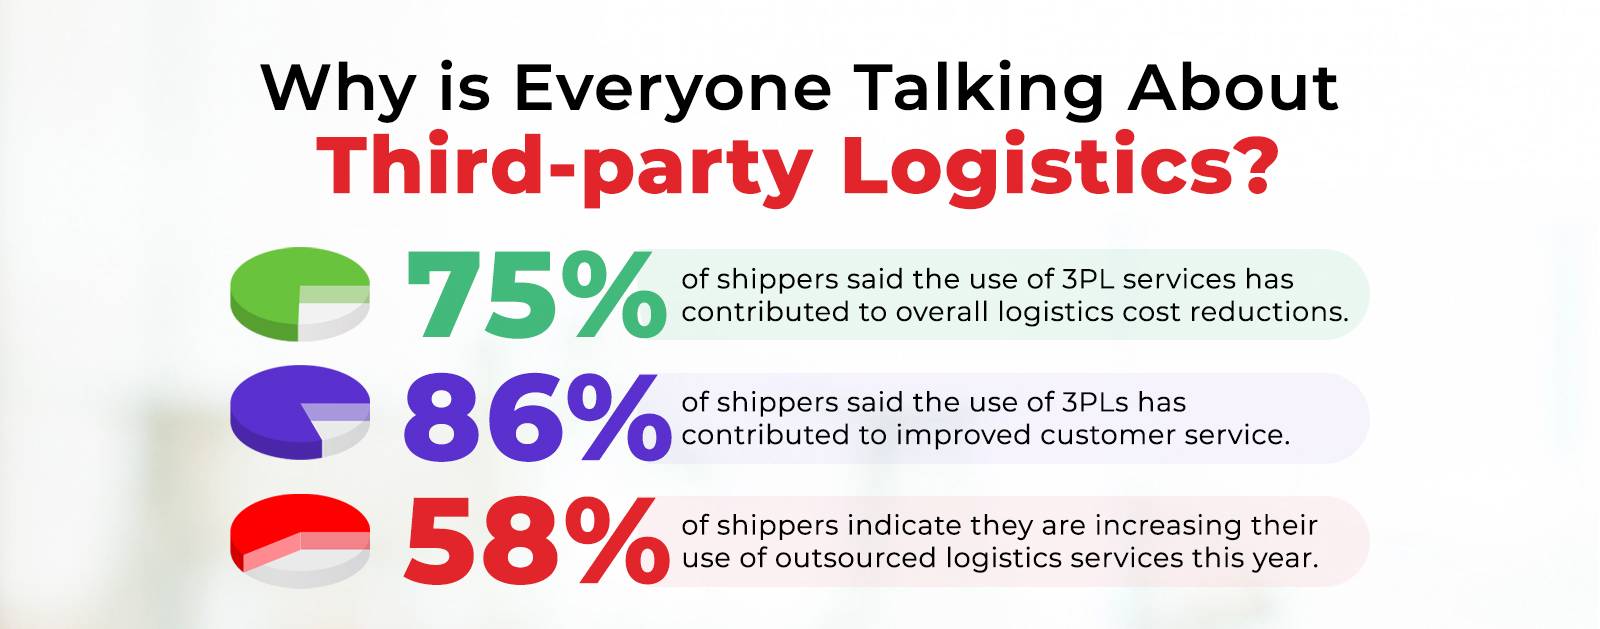 Why is everyone talking about third-party logistics